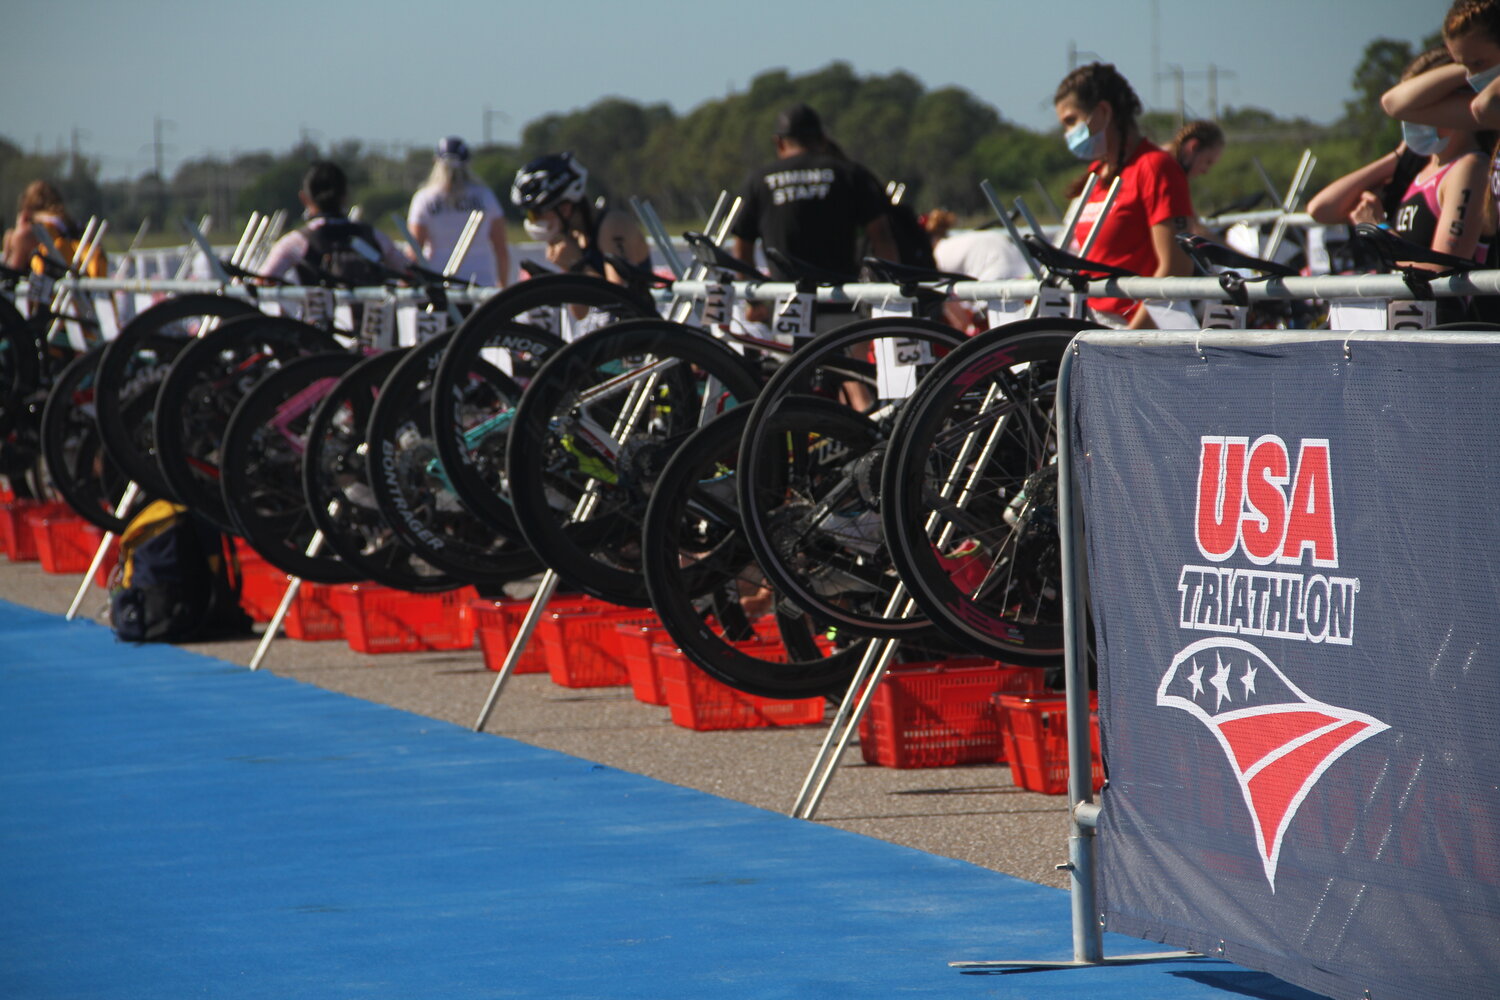 BIG TRIATHLON COMING UP? MAKE SURE YOU’RE RACE READY!